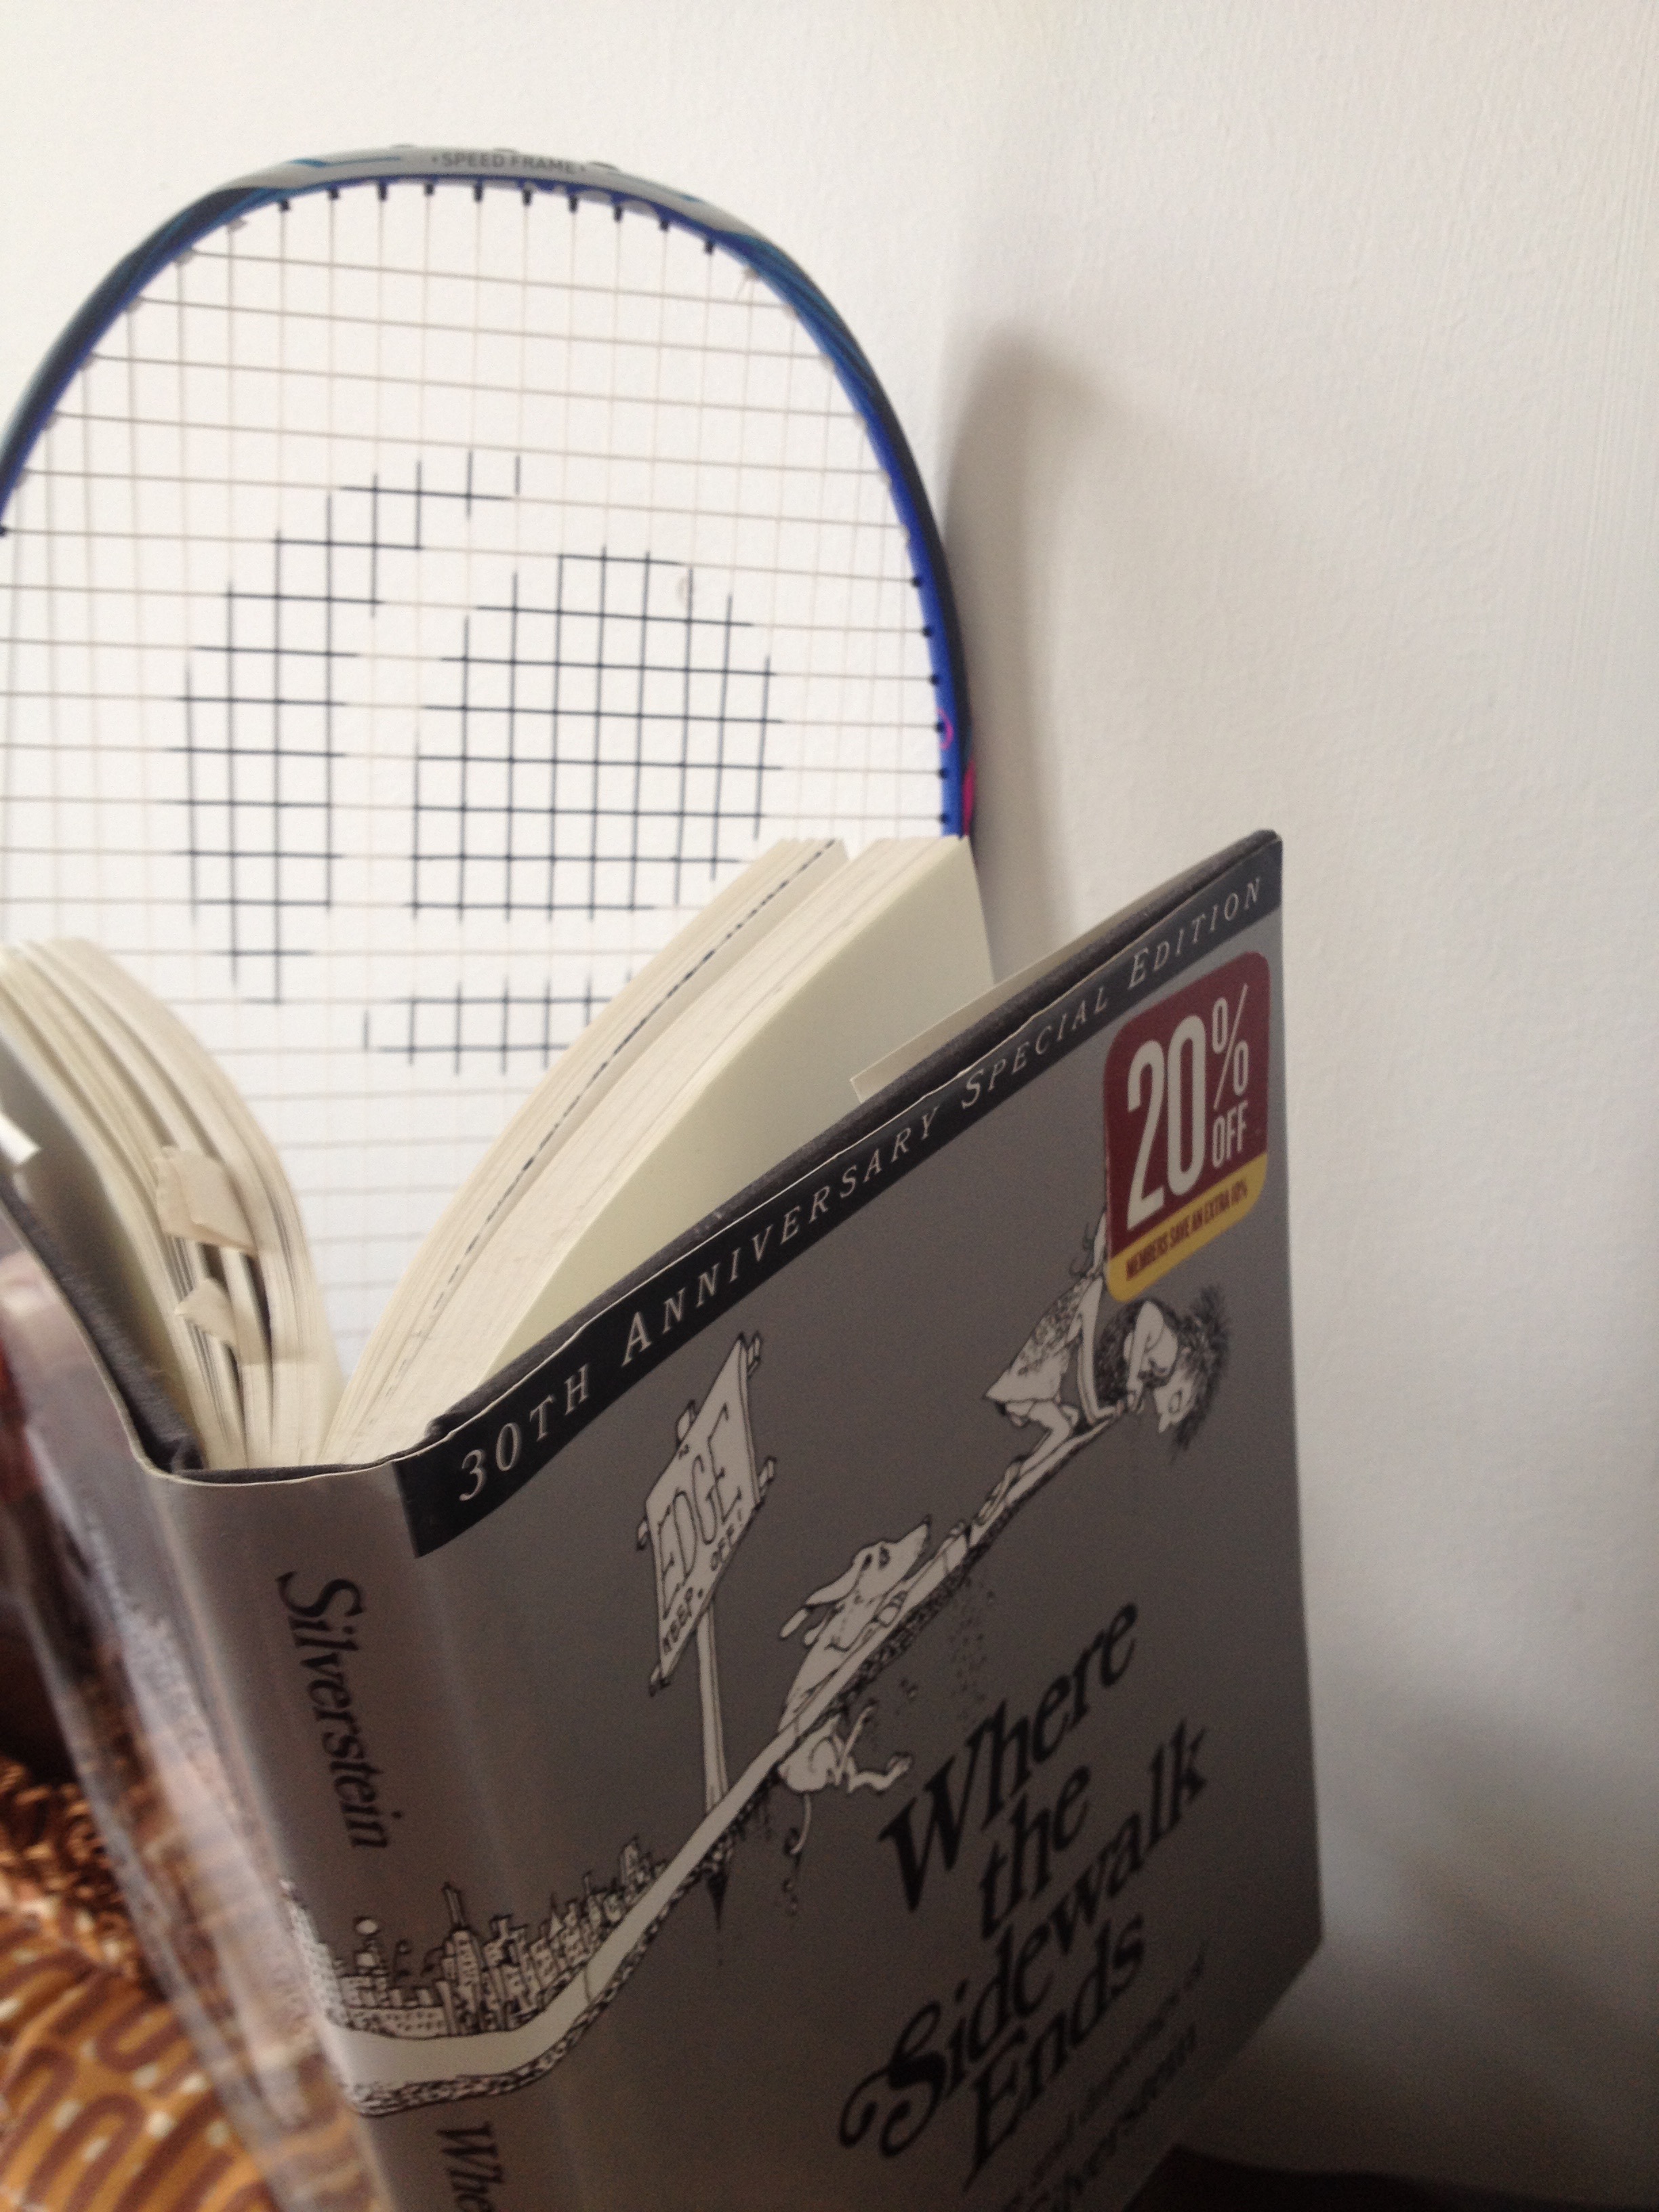 After a snack, my racket likes to read a little poetry to keep it's mind fresh. 